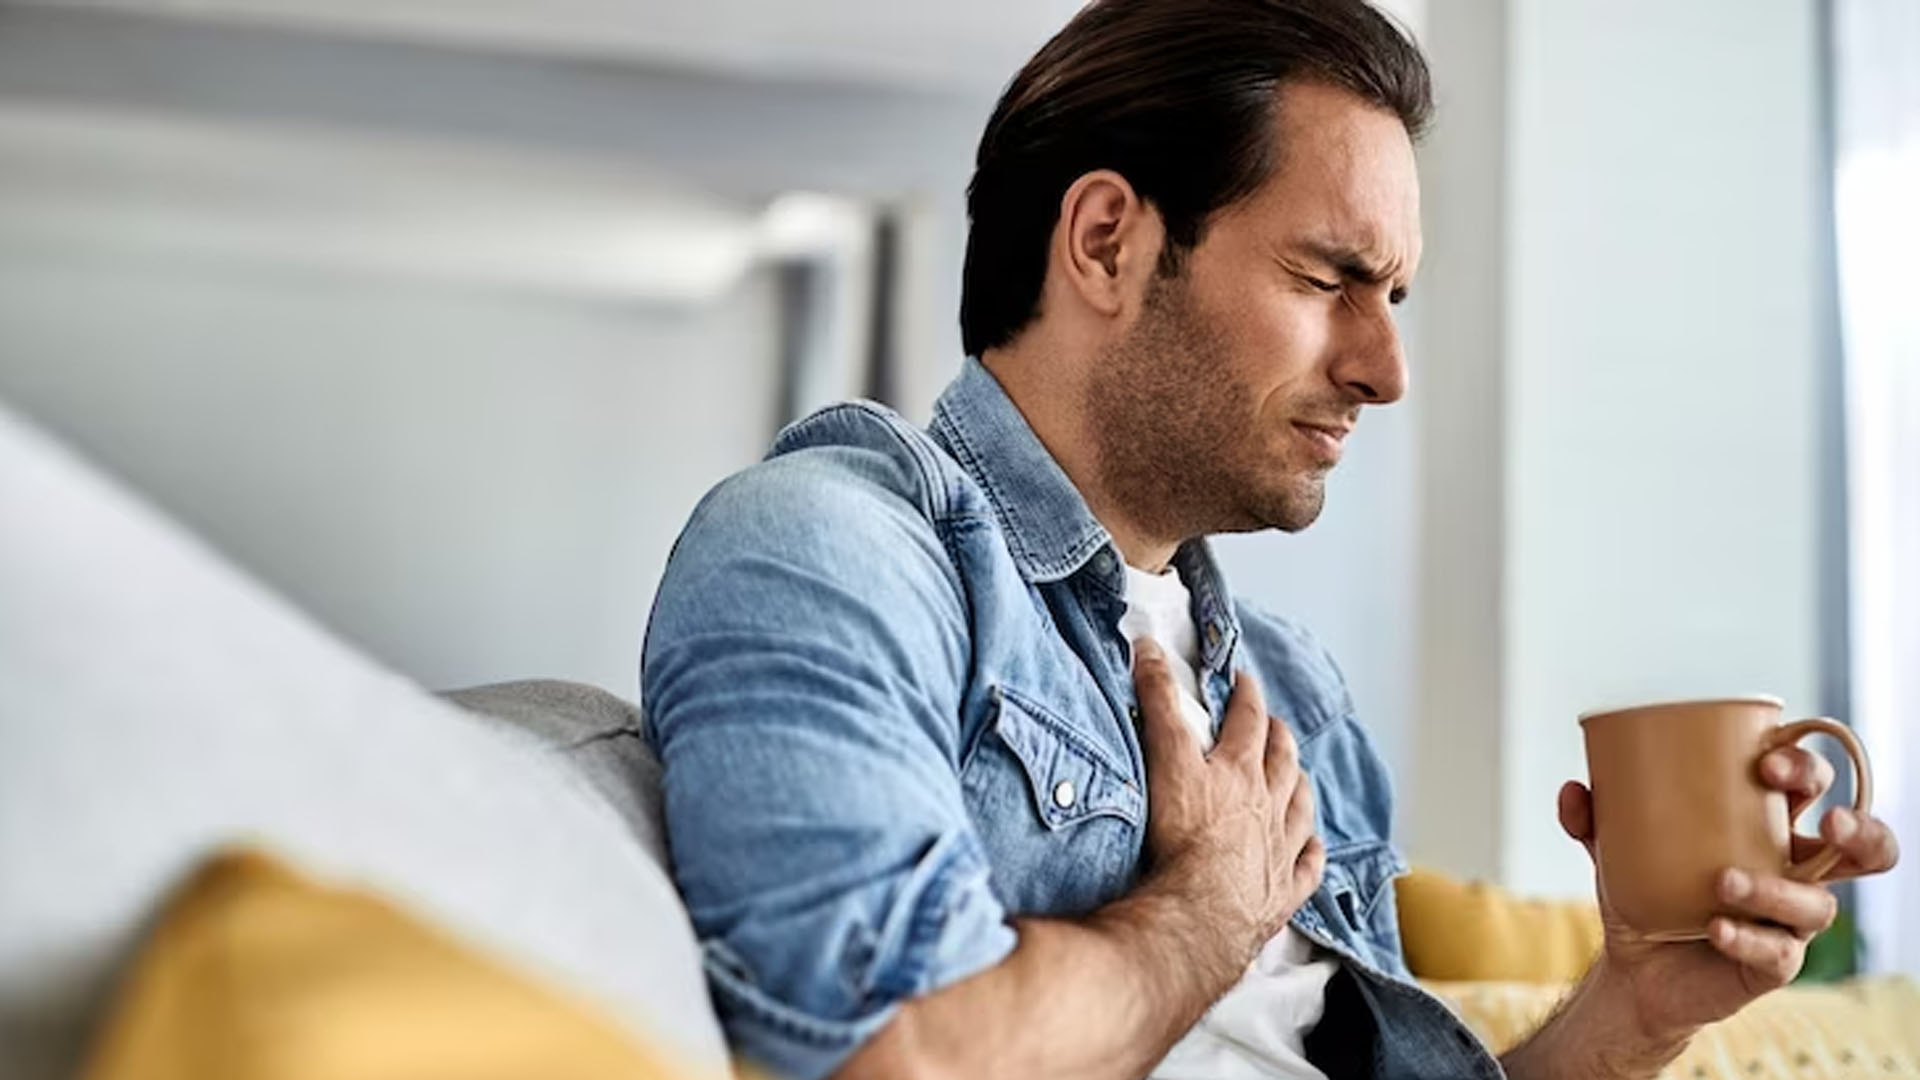 What are Heart Palpitations Symptoms of?